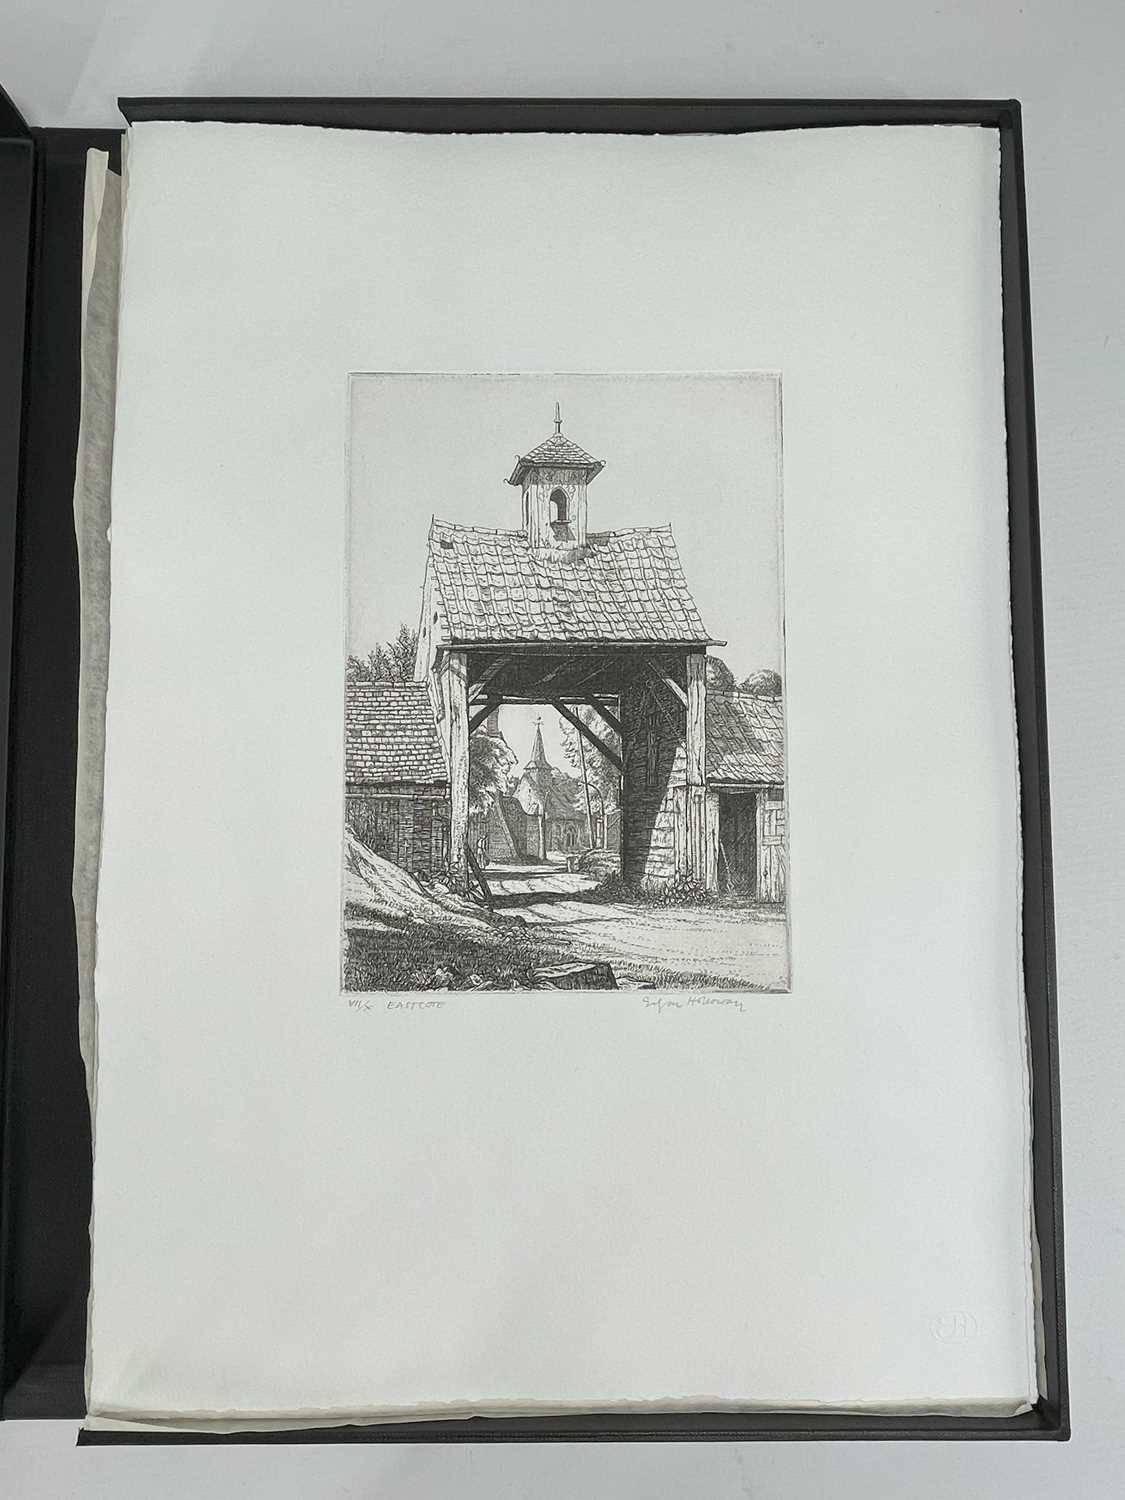 ‡ EDGAR HOLLOWAY limited edition (7/40) portfolio of seven etchings and engravings produced by - Image 10 of 13